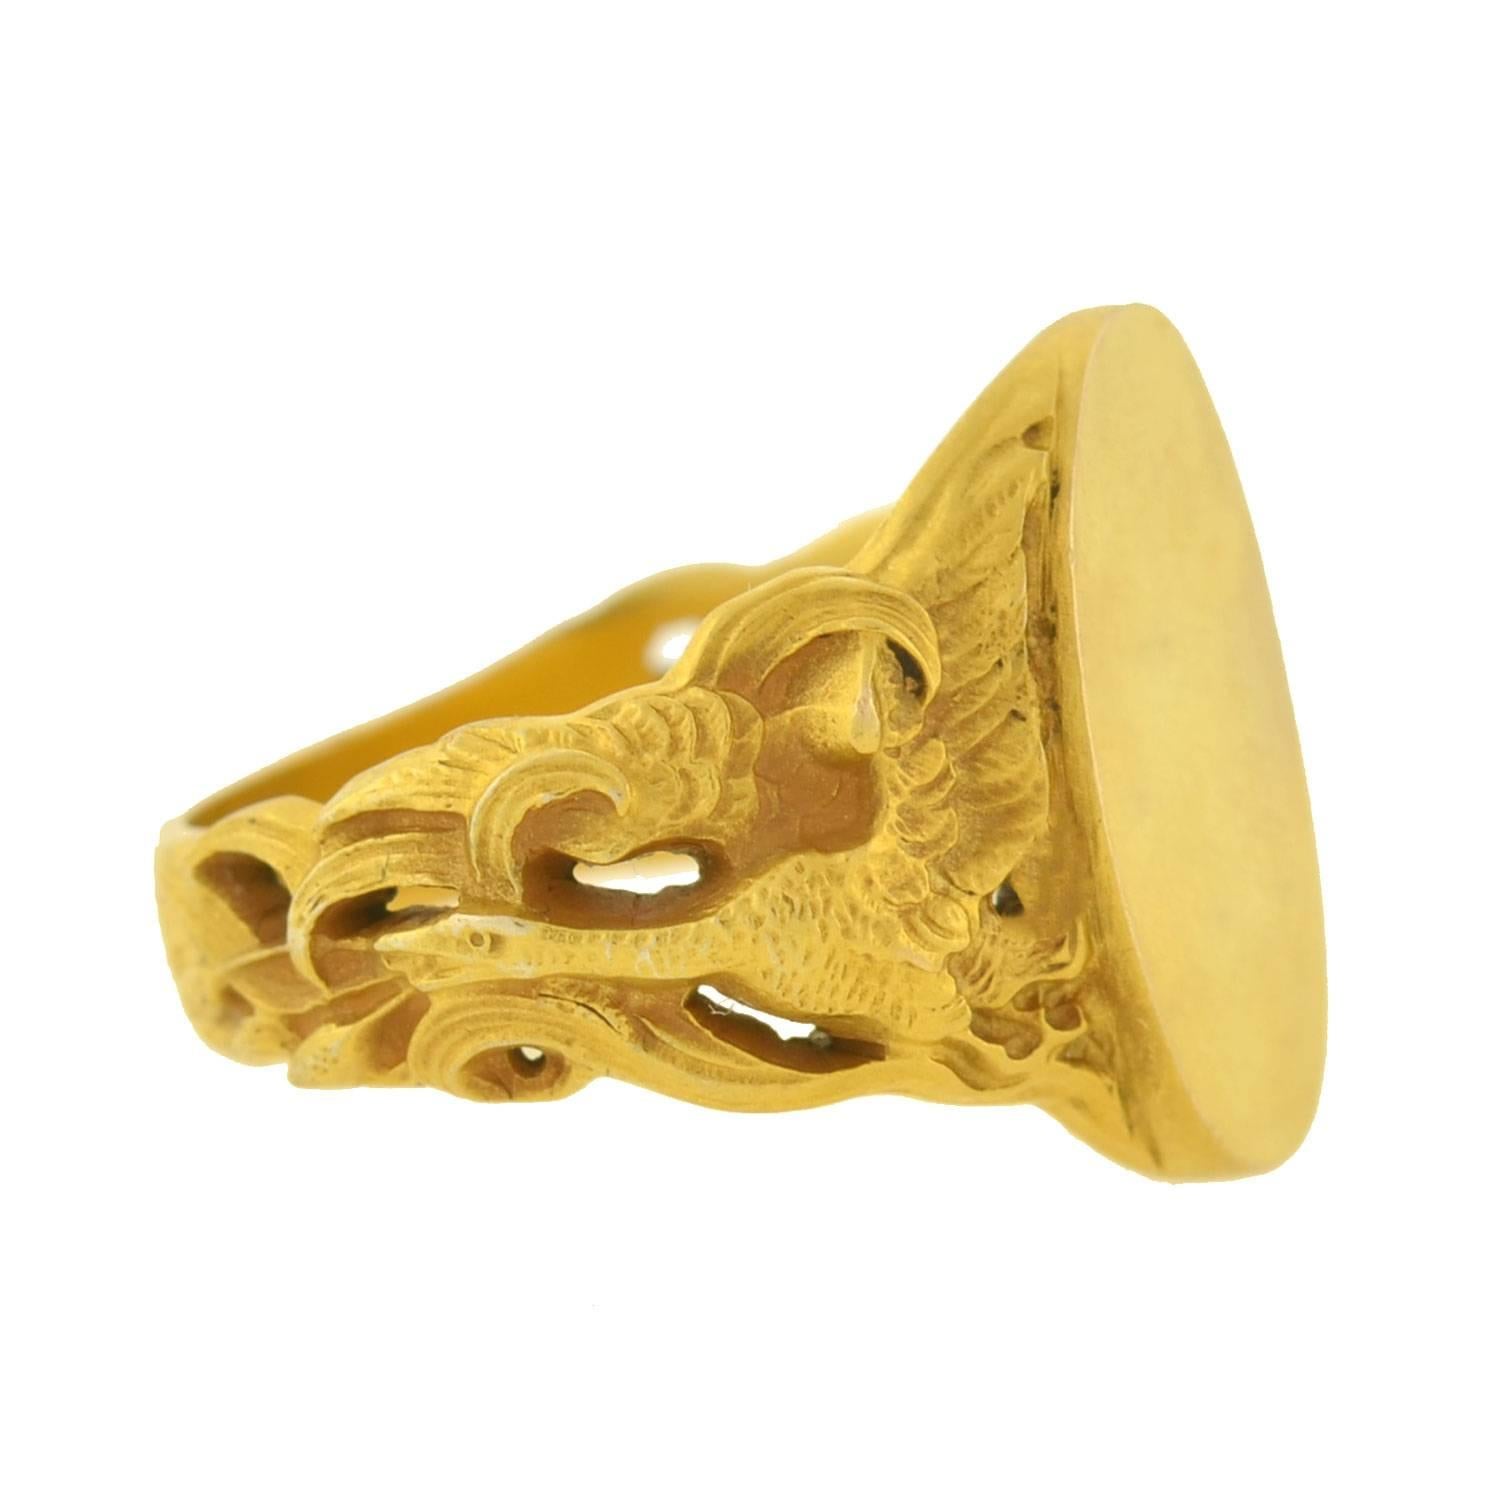 A signet ring can be represented by a smooth or engraved seal, or with an intaglio, which is created by carving into the surface of a stone. Its purpose would have been to seal the wax of a letter or note.

A stunning gold signet ring from the Art